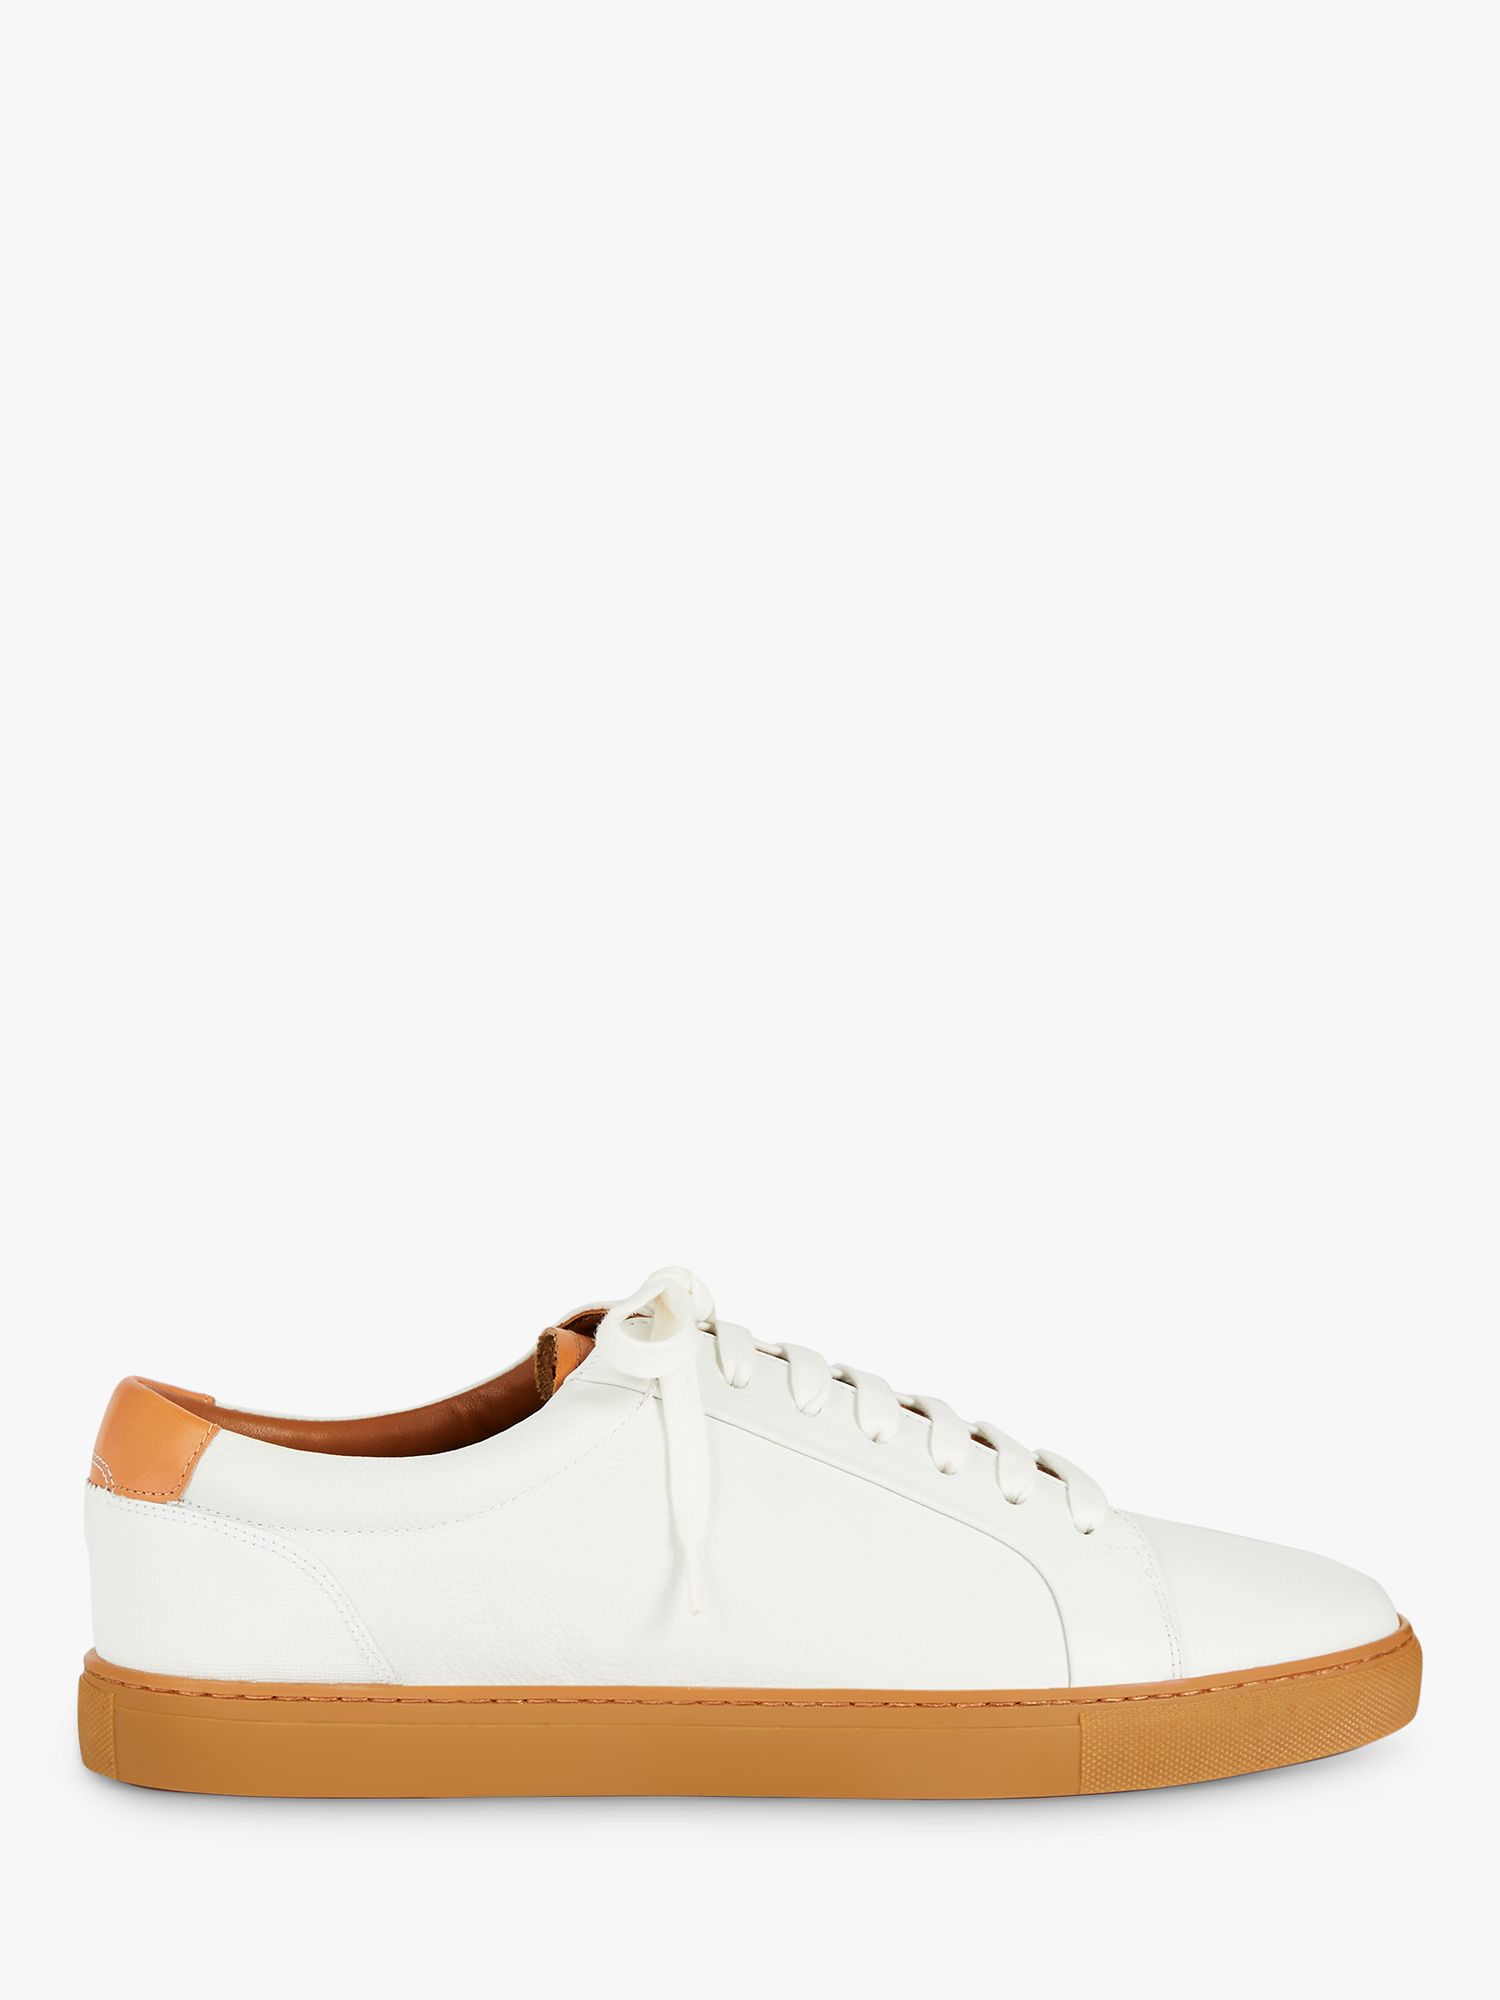 Ted Baker Udamo Leather Trainers, Light Brown, 6